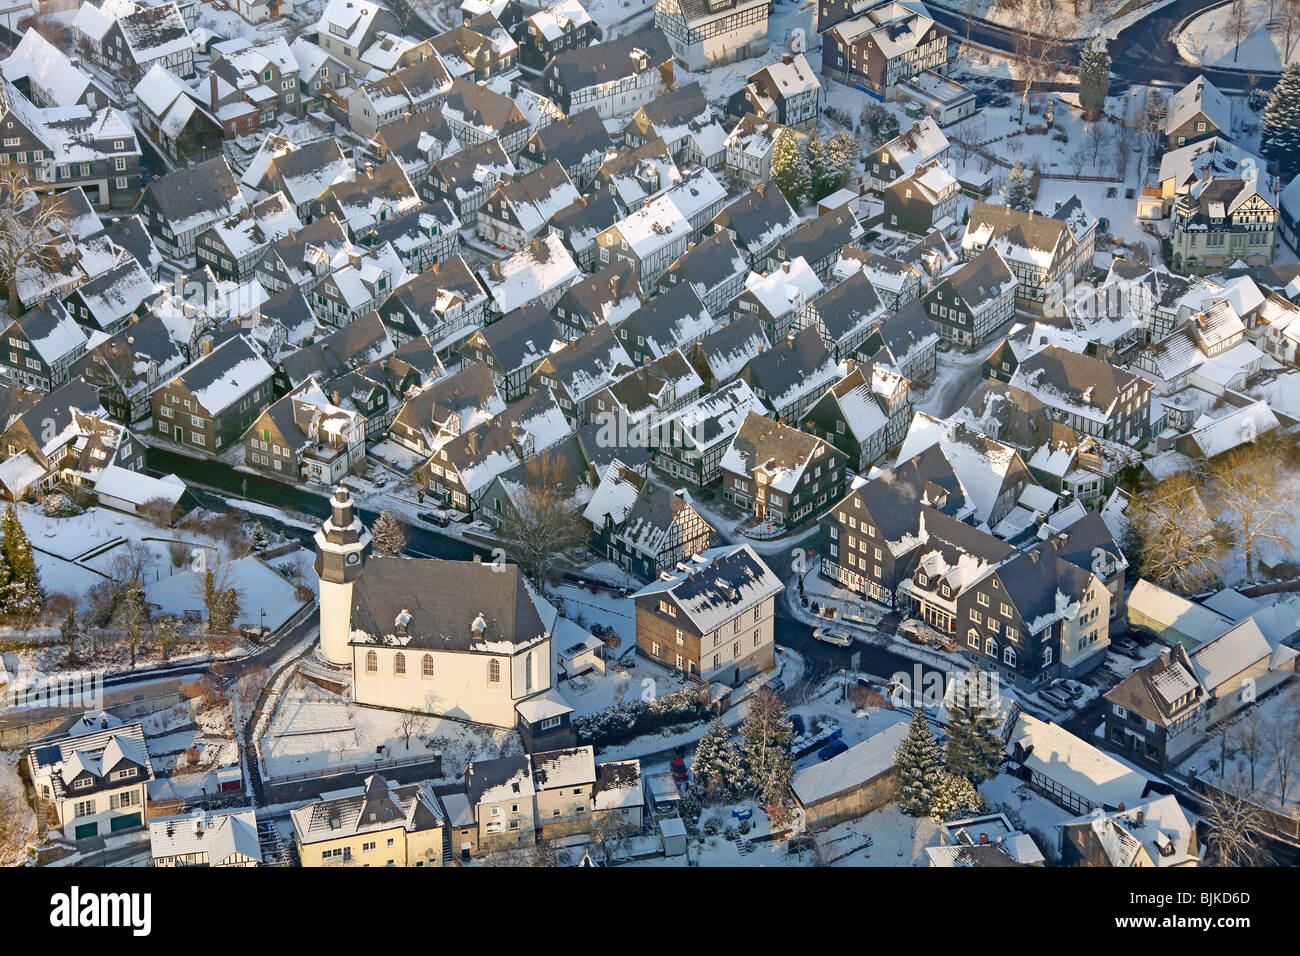 Aerial photo, half-timbered houses in the snow in winter, Freudenberg, North Rhine-Westphalia, Germany, Europe Stock Photo